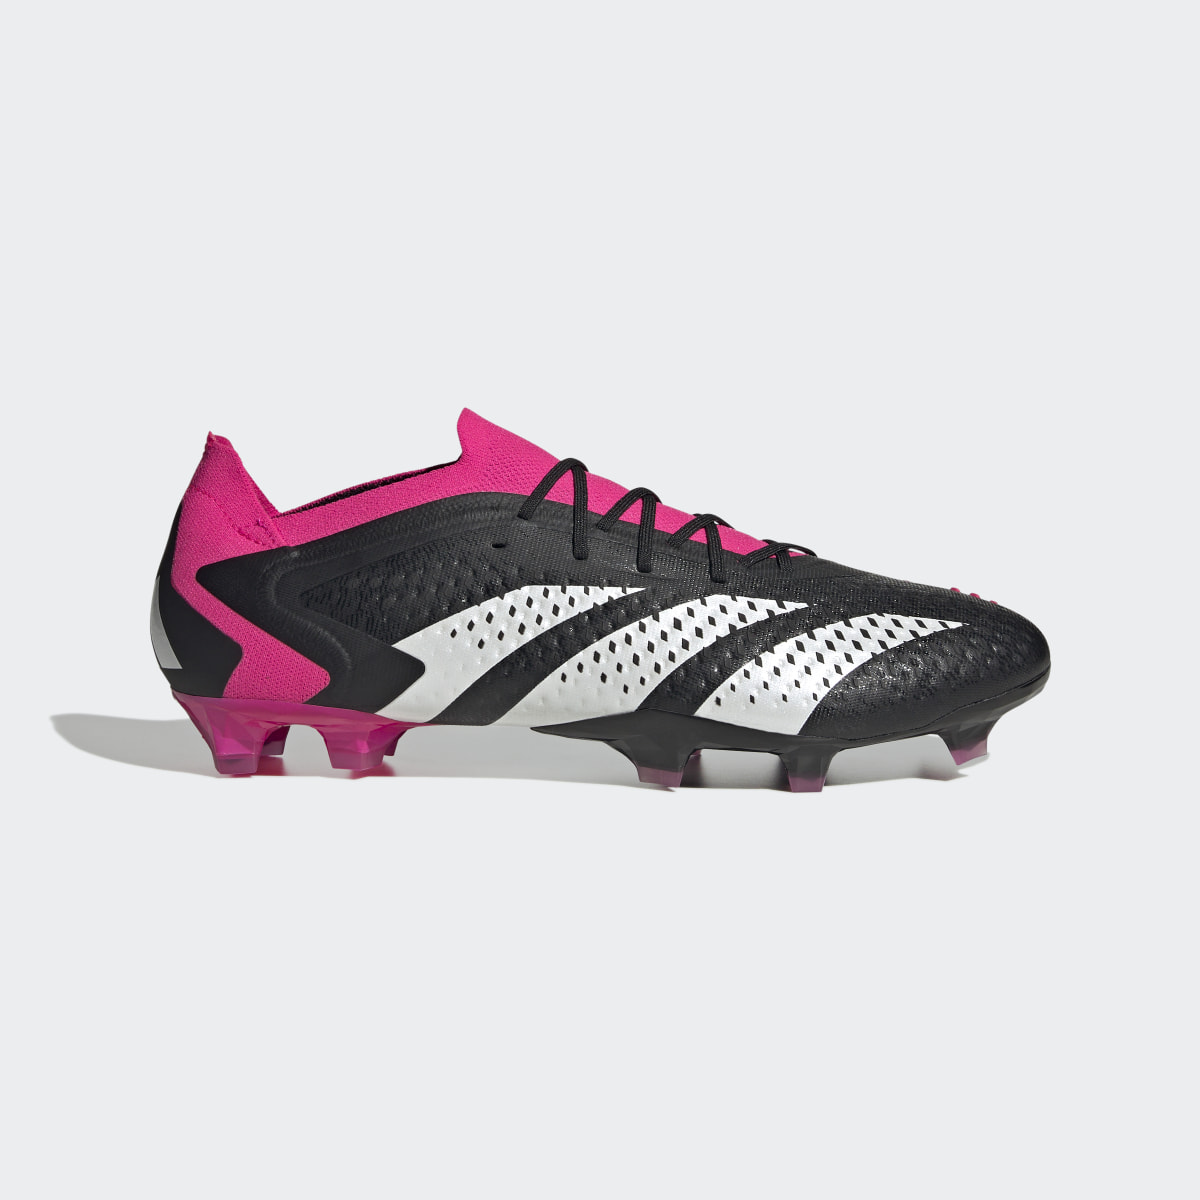 Adidas Predator Accuracy.1 Low Firm Ground Cleats. 5